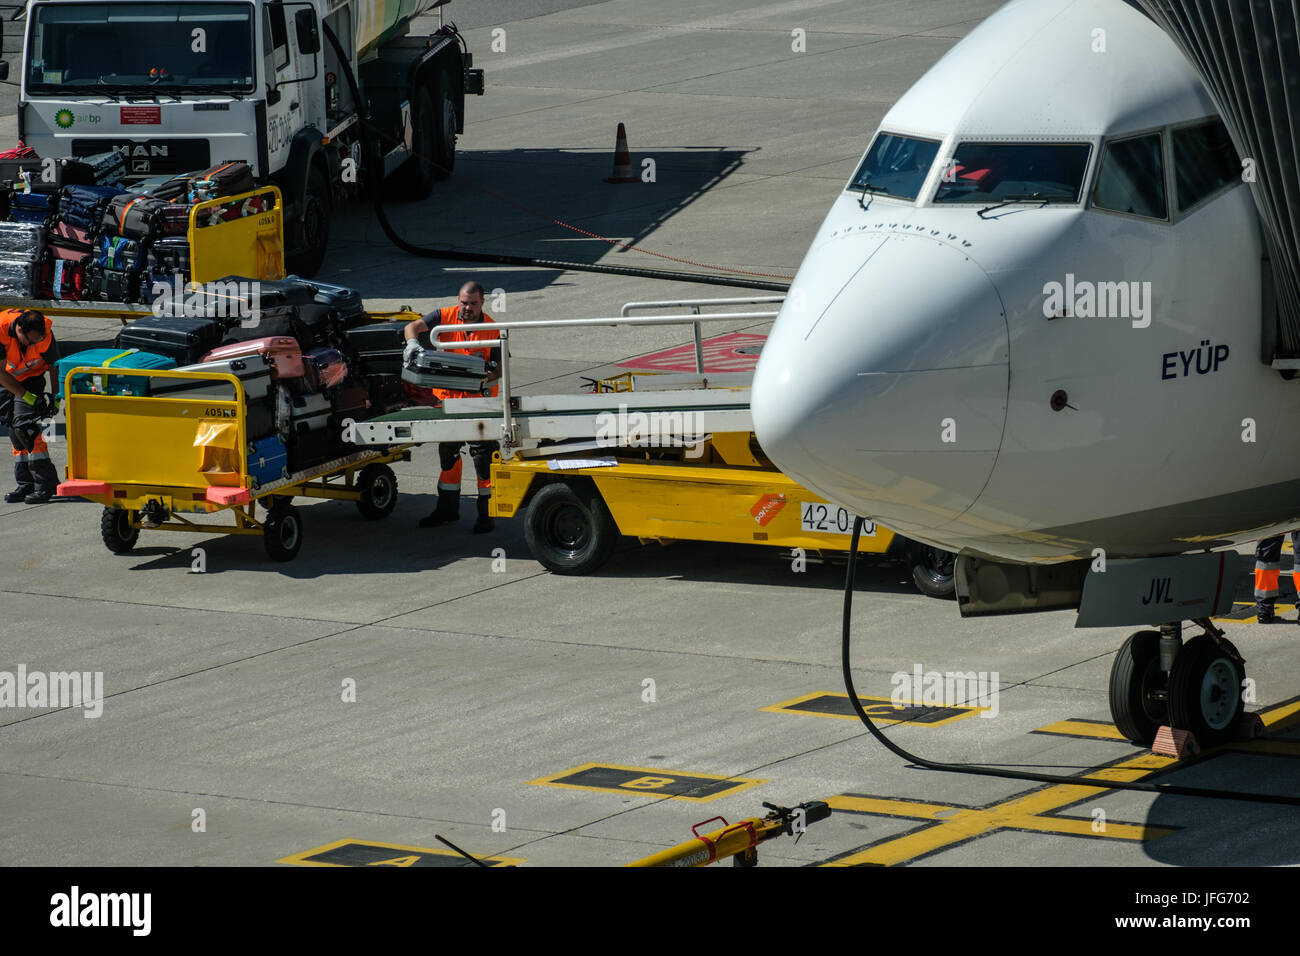 Man loading luggage into airplane at airport tarmac Stock Photo